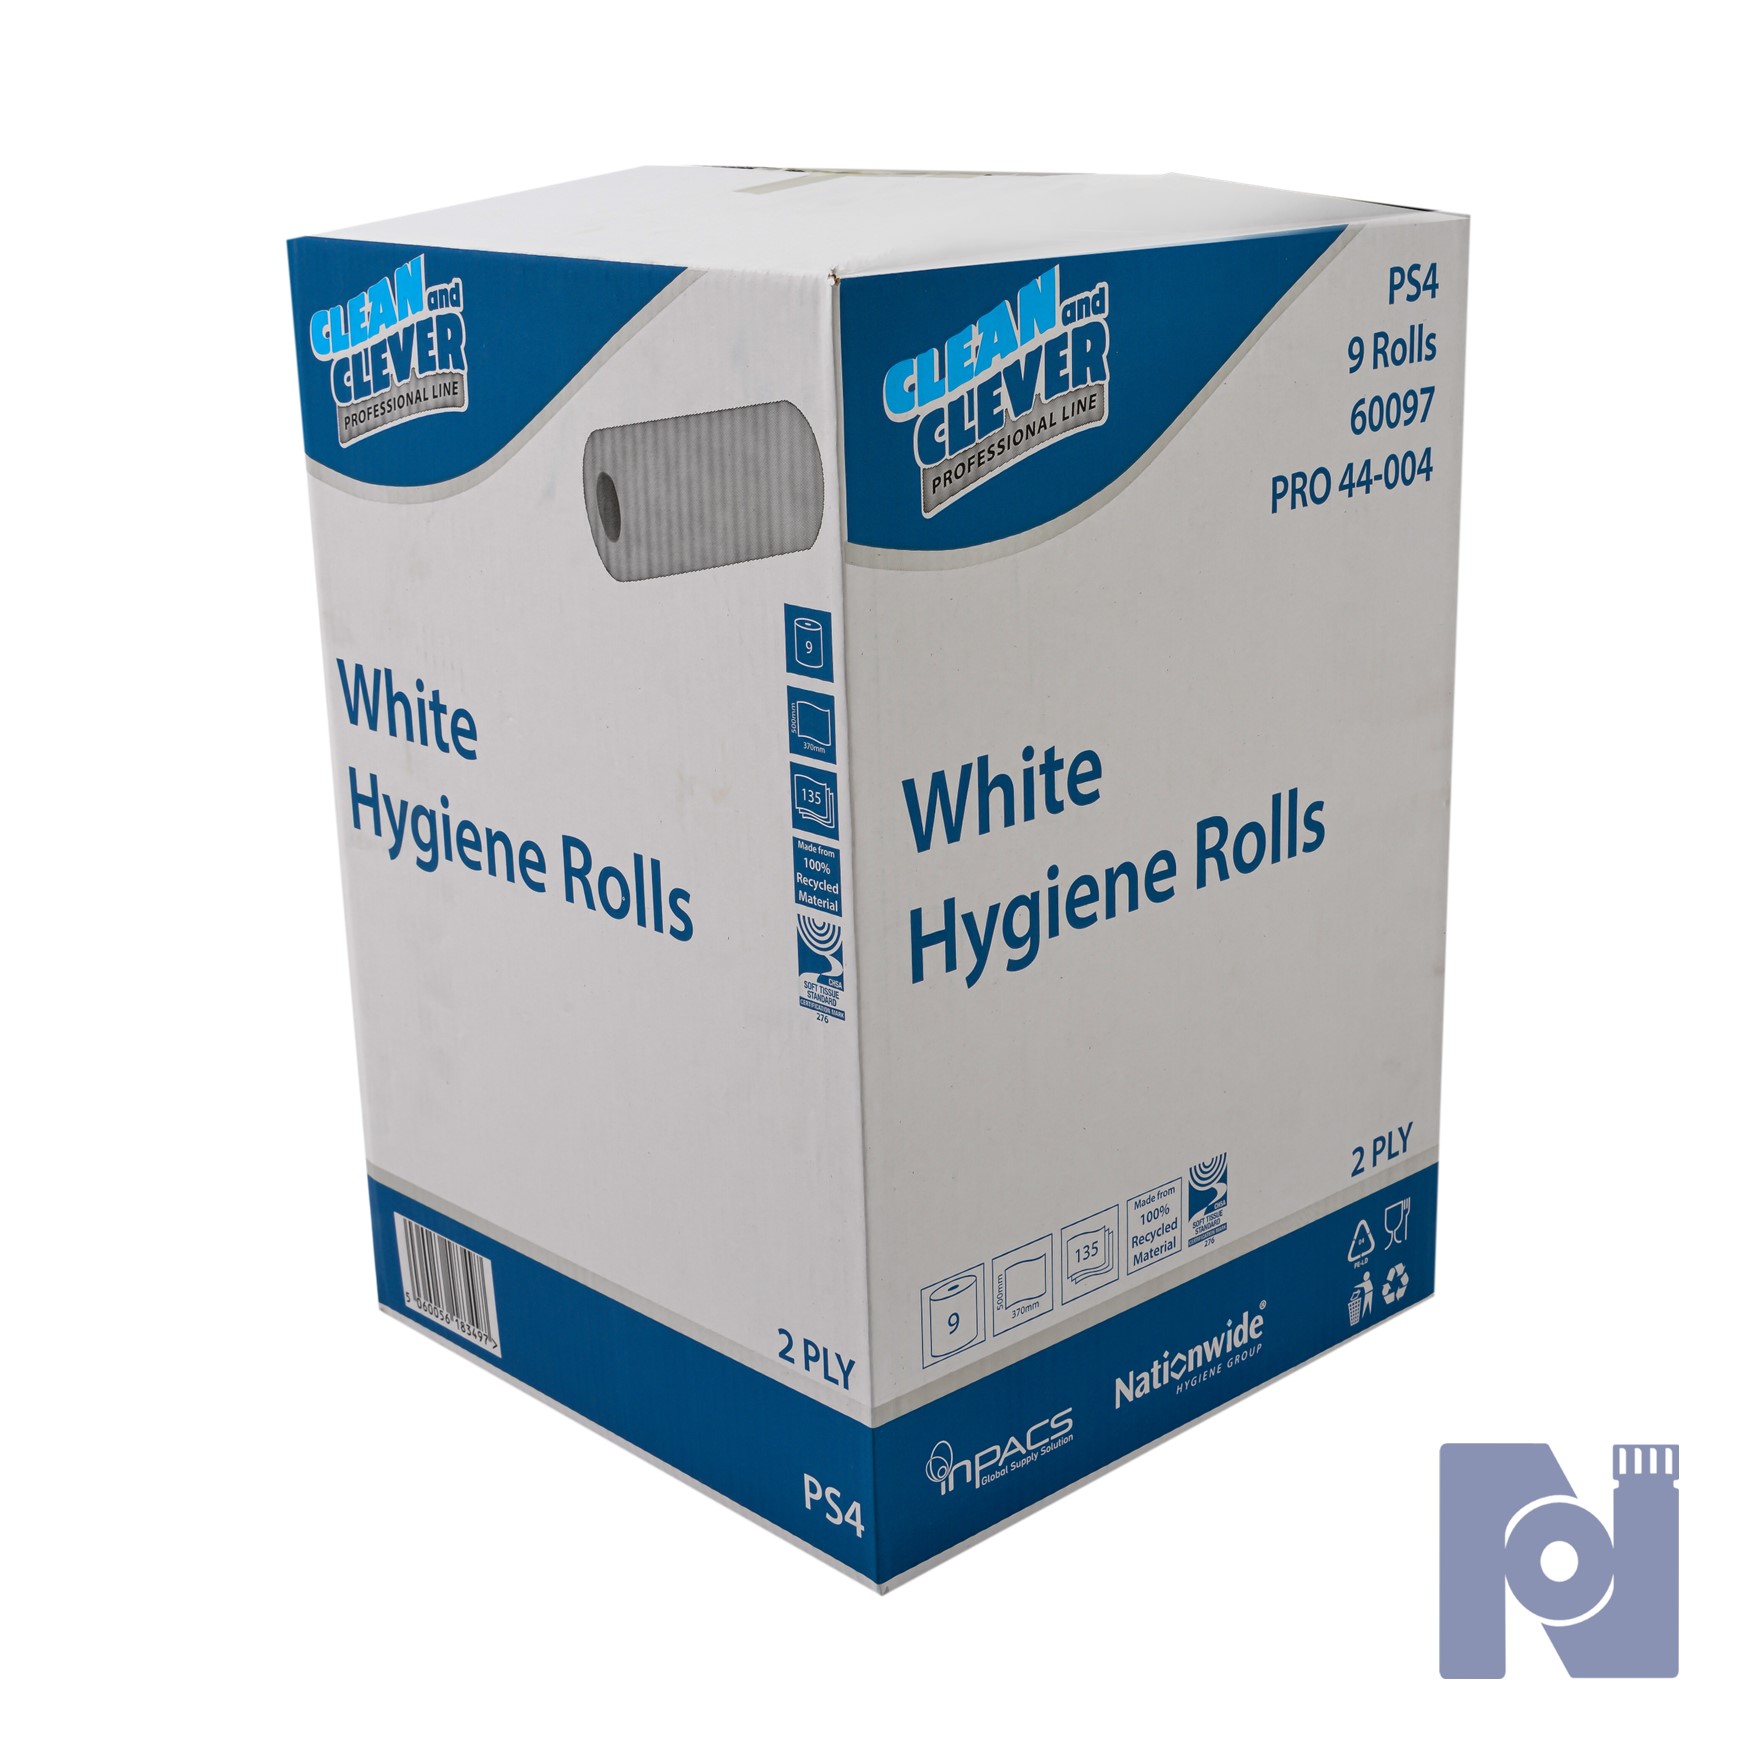 Clean & Clever Hygiene Roll - White PS4